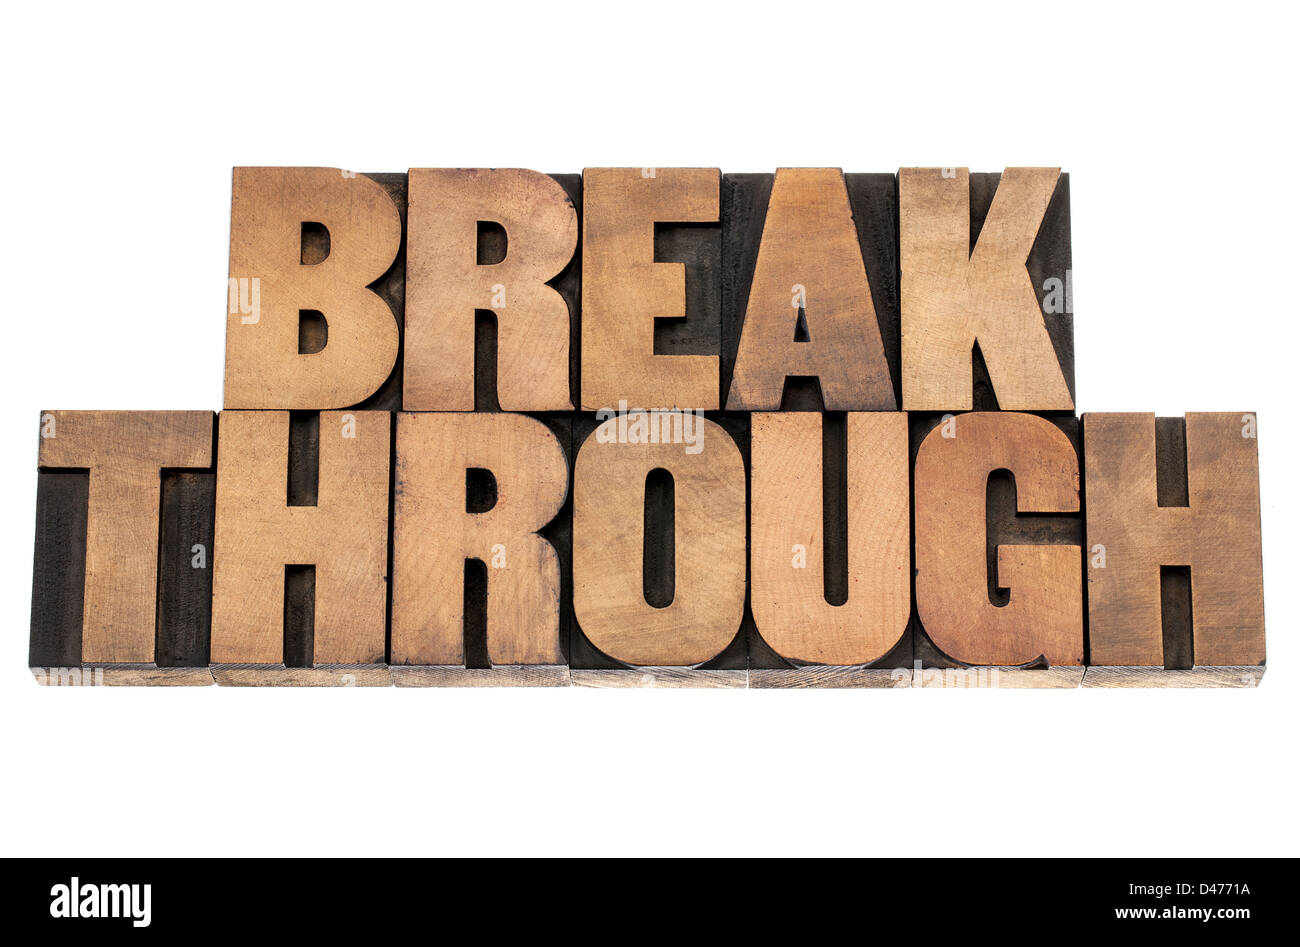 breakthrough word - isolated text in letterpress wood type printing blocks Stock Photo